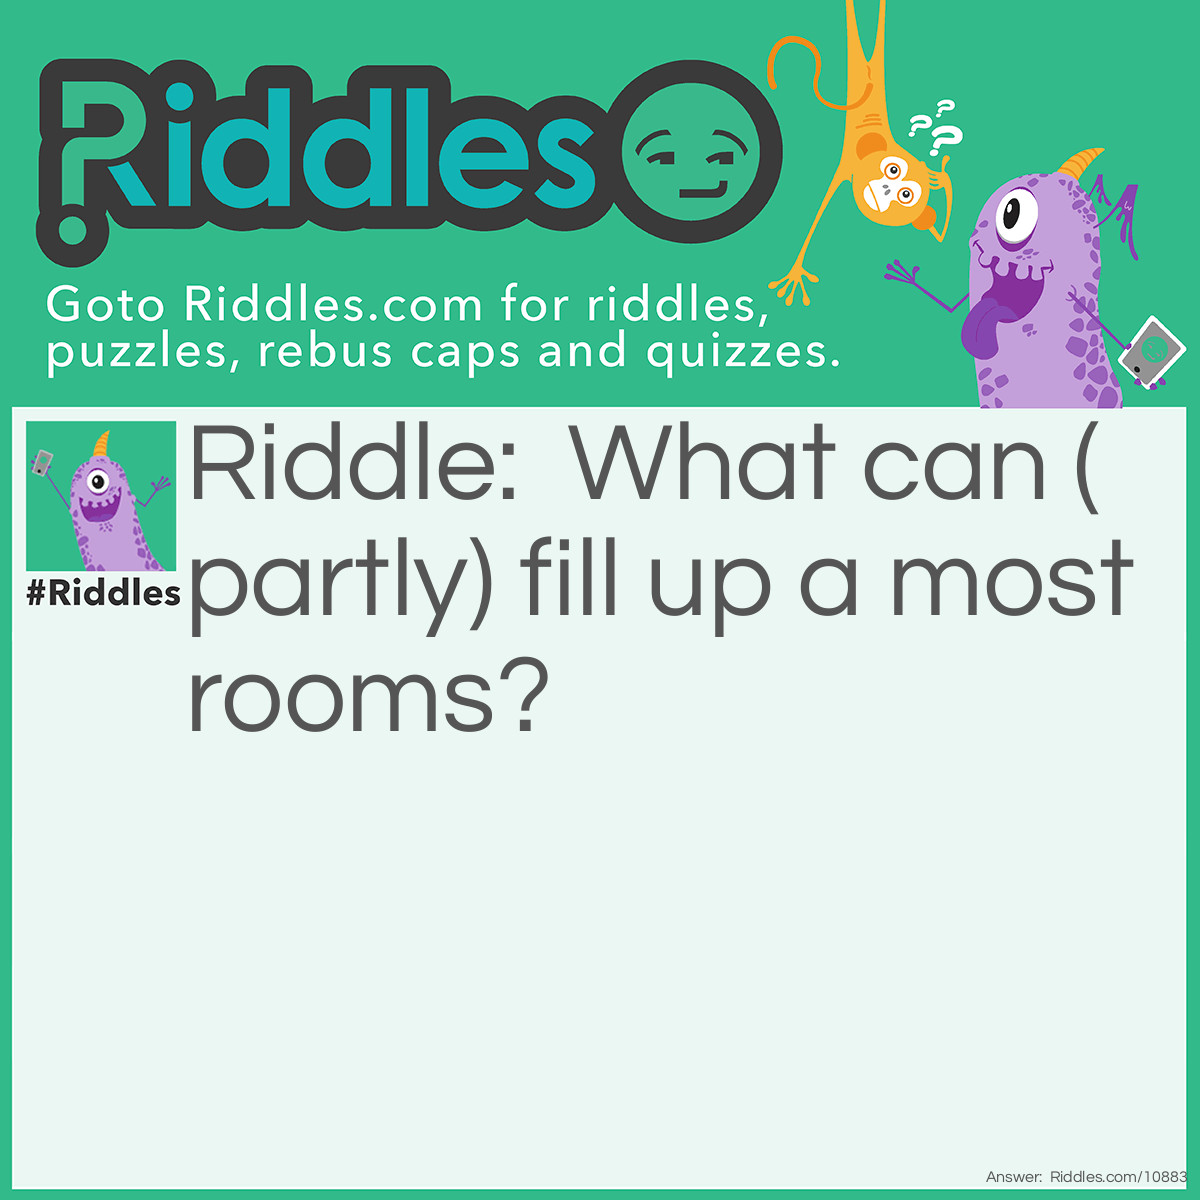 Riddle: What can (partly) fill up a most rooms? Answer: Light!